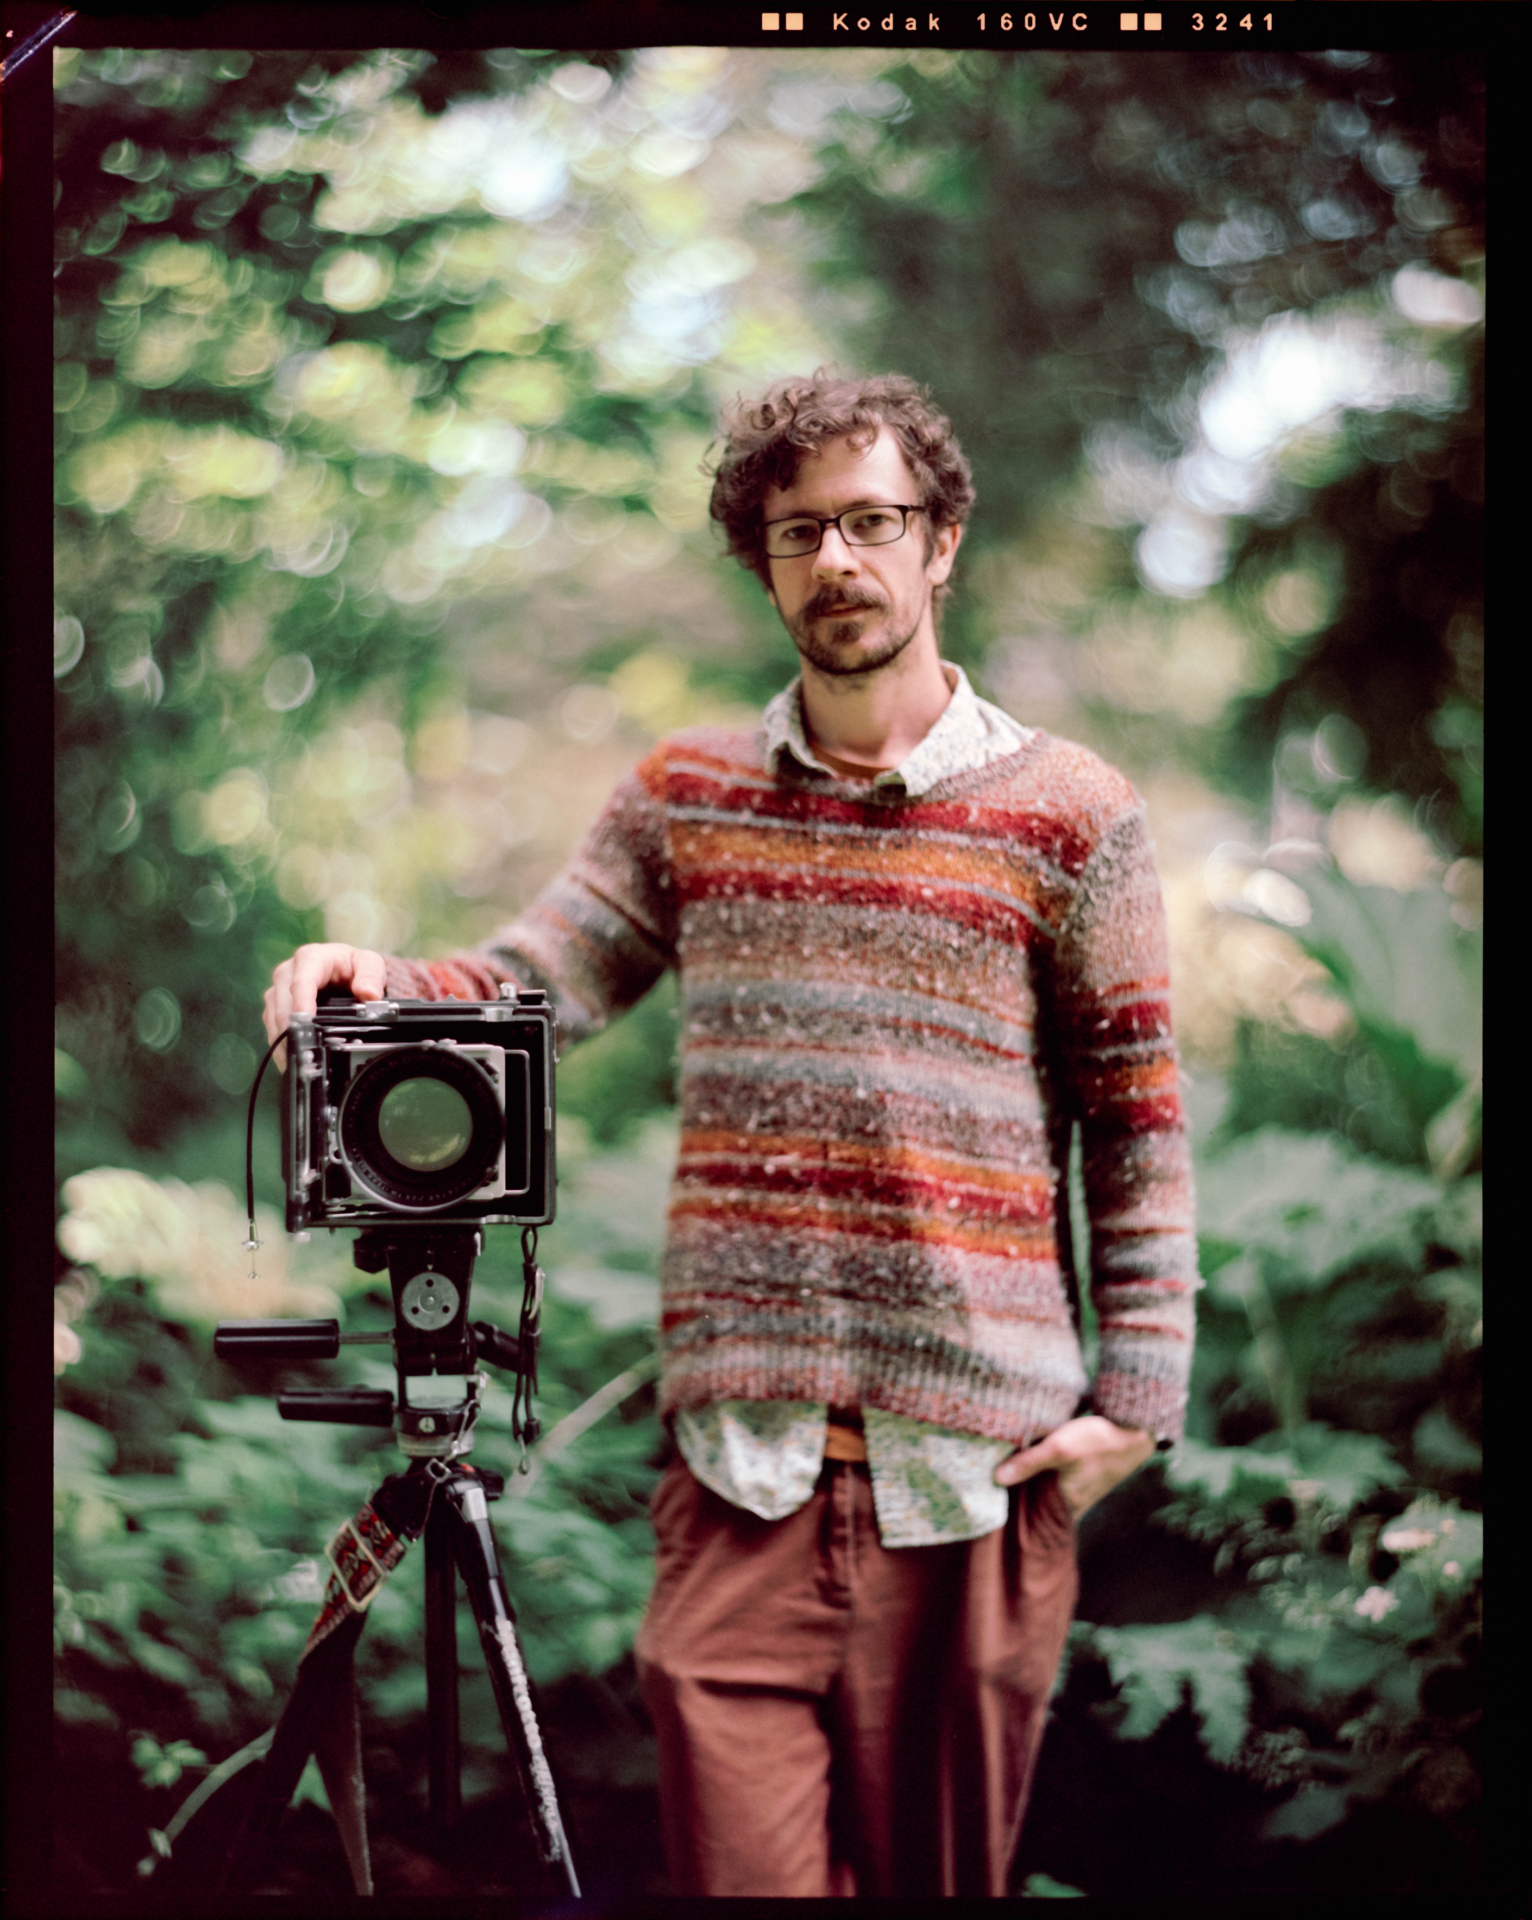 Photograph of Dave, who showed JP the large-format camera ropes, posing next to his camera. Because the back of his camera is open, you can see the green foliage in the background through the lens.